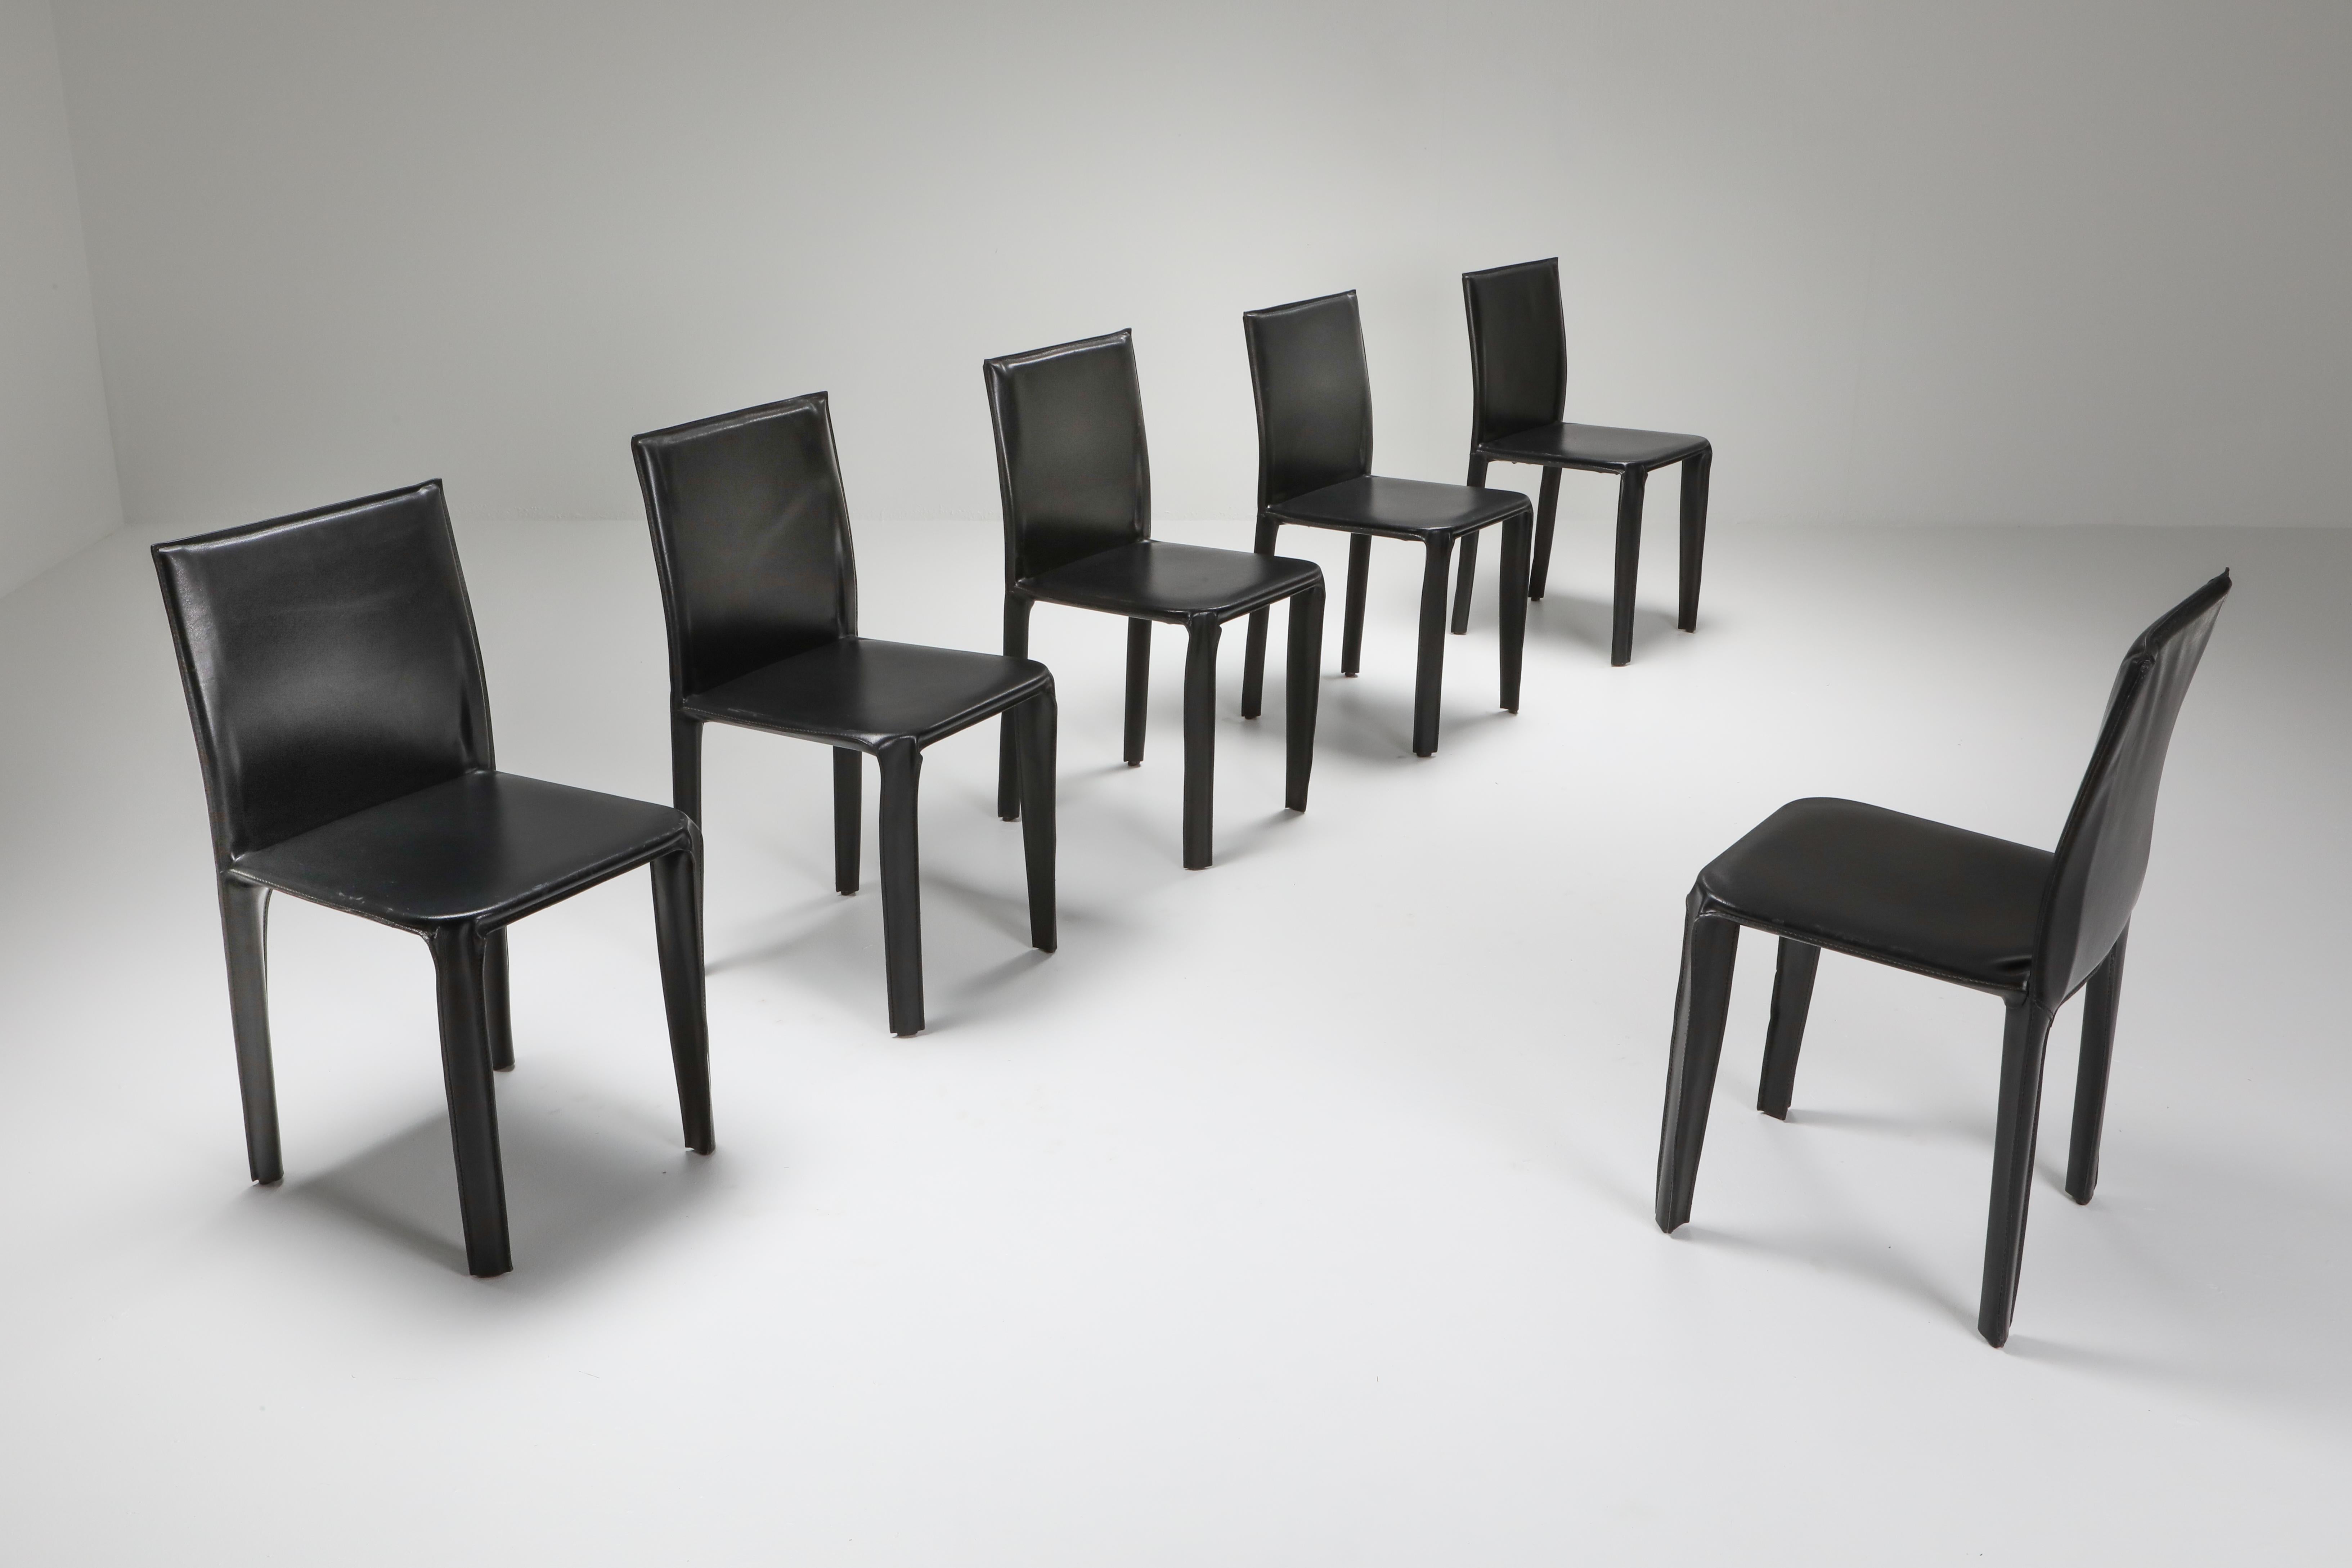 Studio Grassi & Bianchi for Pellizoni, Italy, 1970s
Postmodern black full-grain leather dining chairs comparable to Mario Bellini's CAB chair
Nice wear and great vintage condition.
Measures: H 81 cm, W 43.5 cm, D 42 cm, SH 45.5 cm.
       